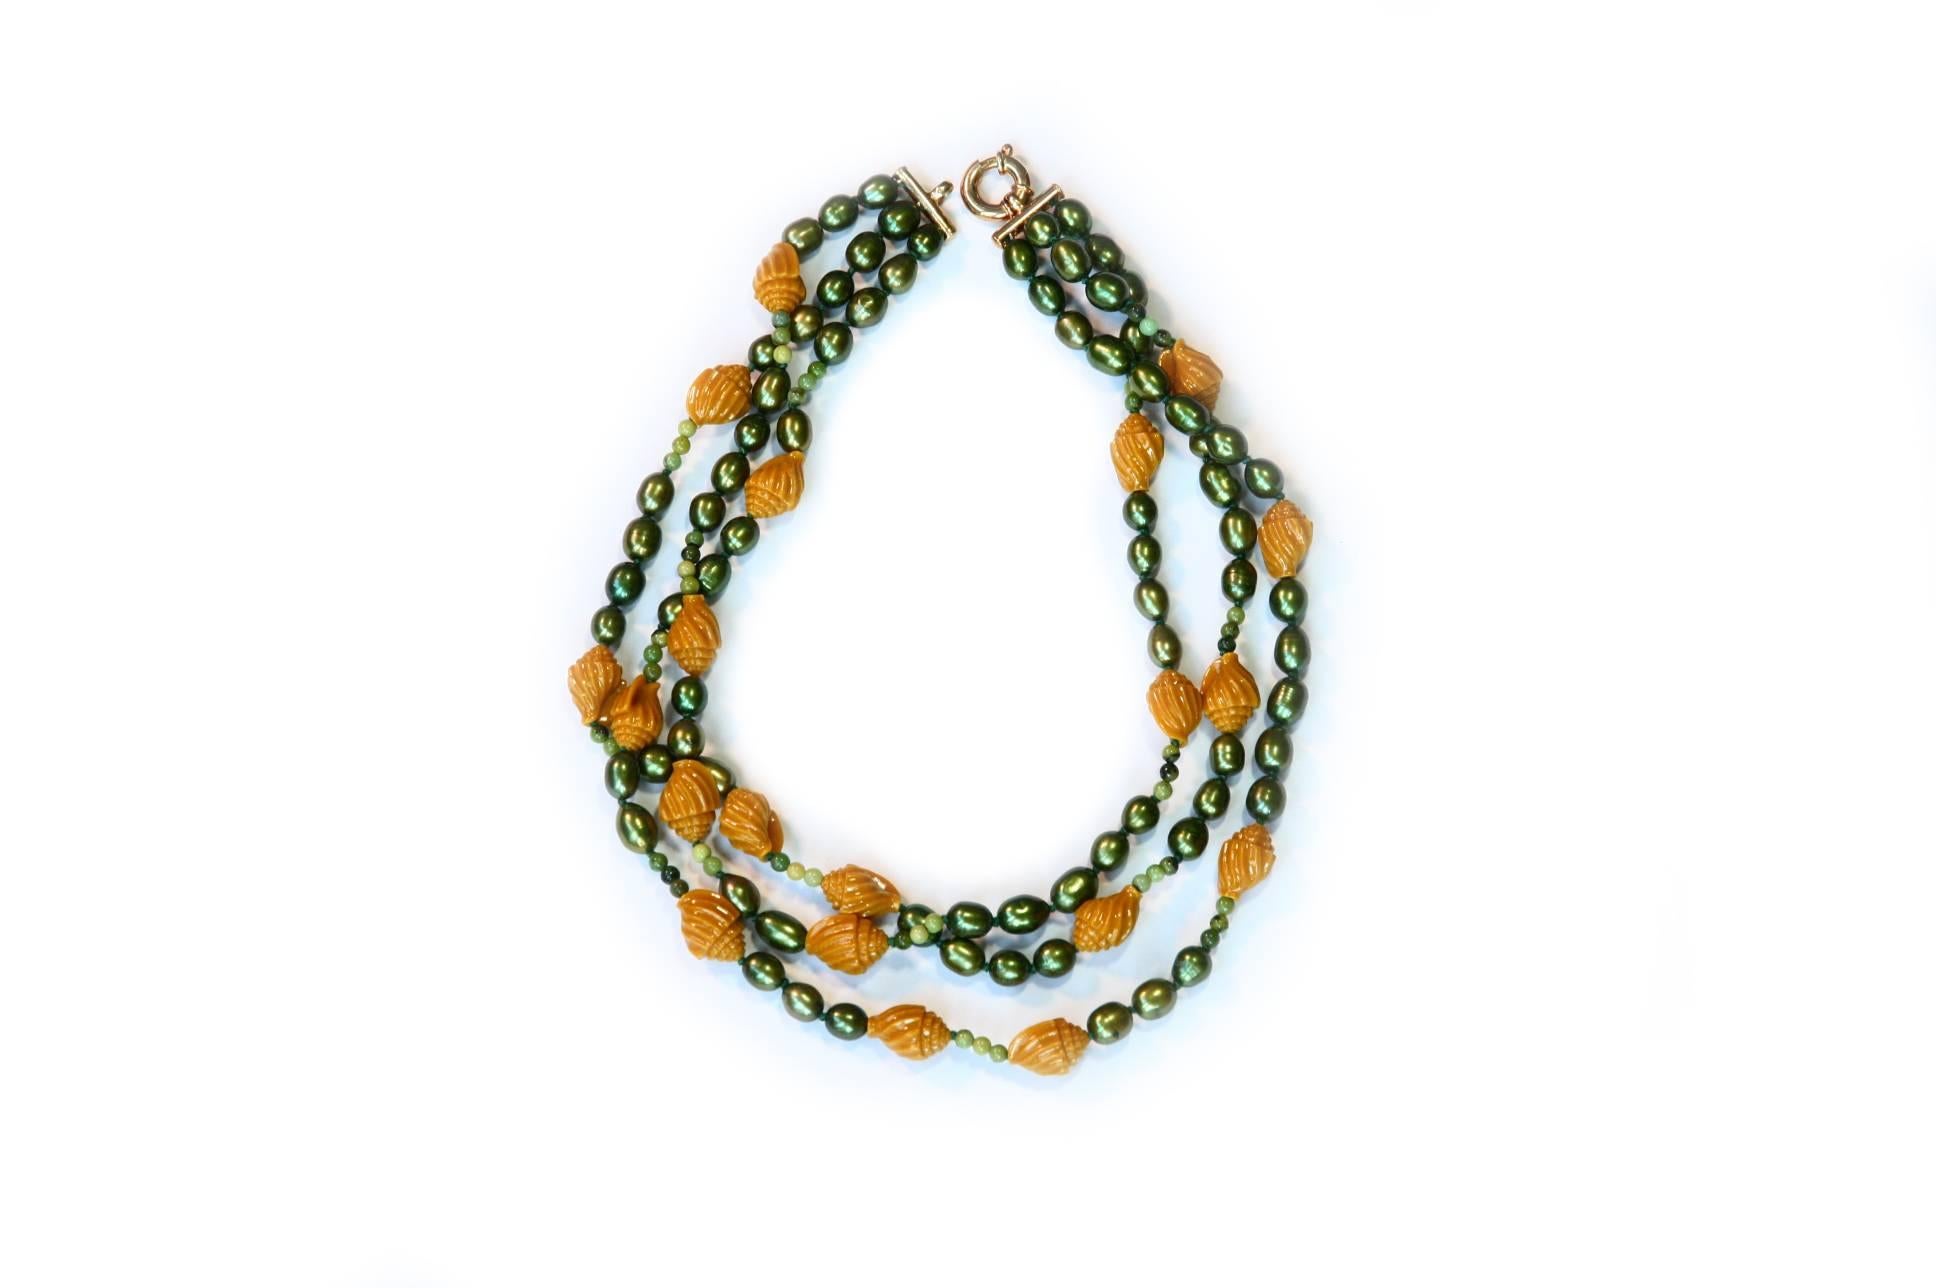 Necklace with carved yellow coral shells green fresh water pearls amazonite.
Total length 46cm gold plated.
All Giulia Colussi jewelry is new and has never been previously owned or worn. Each item will arrive at your door beautifully gift wrapped in